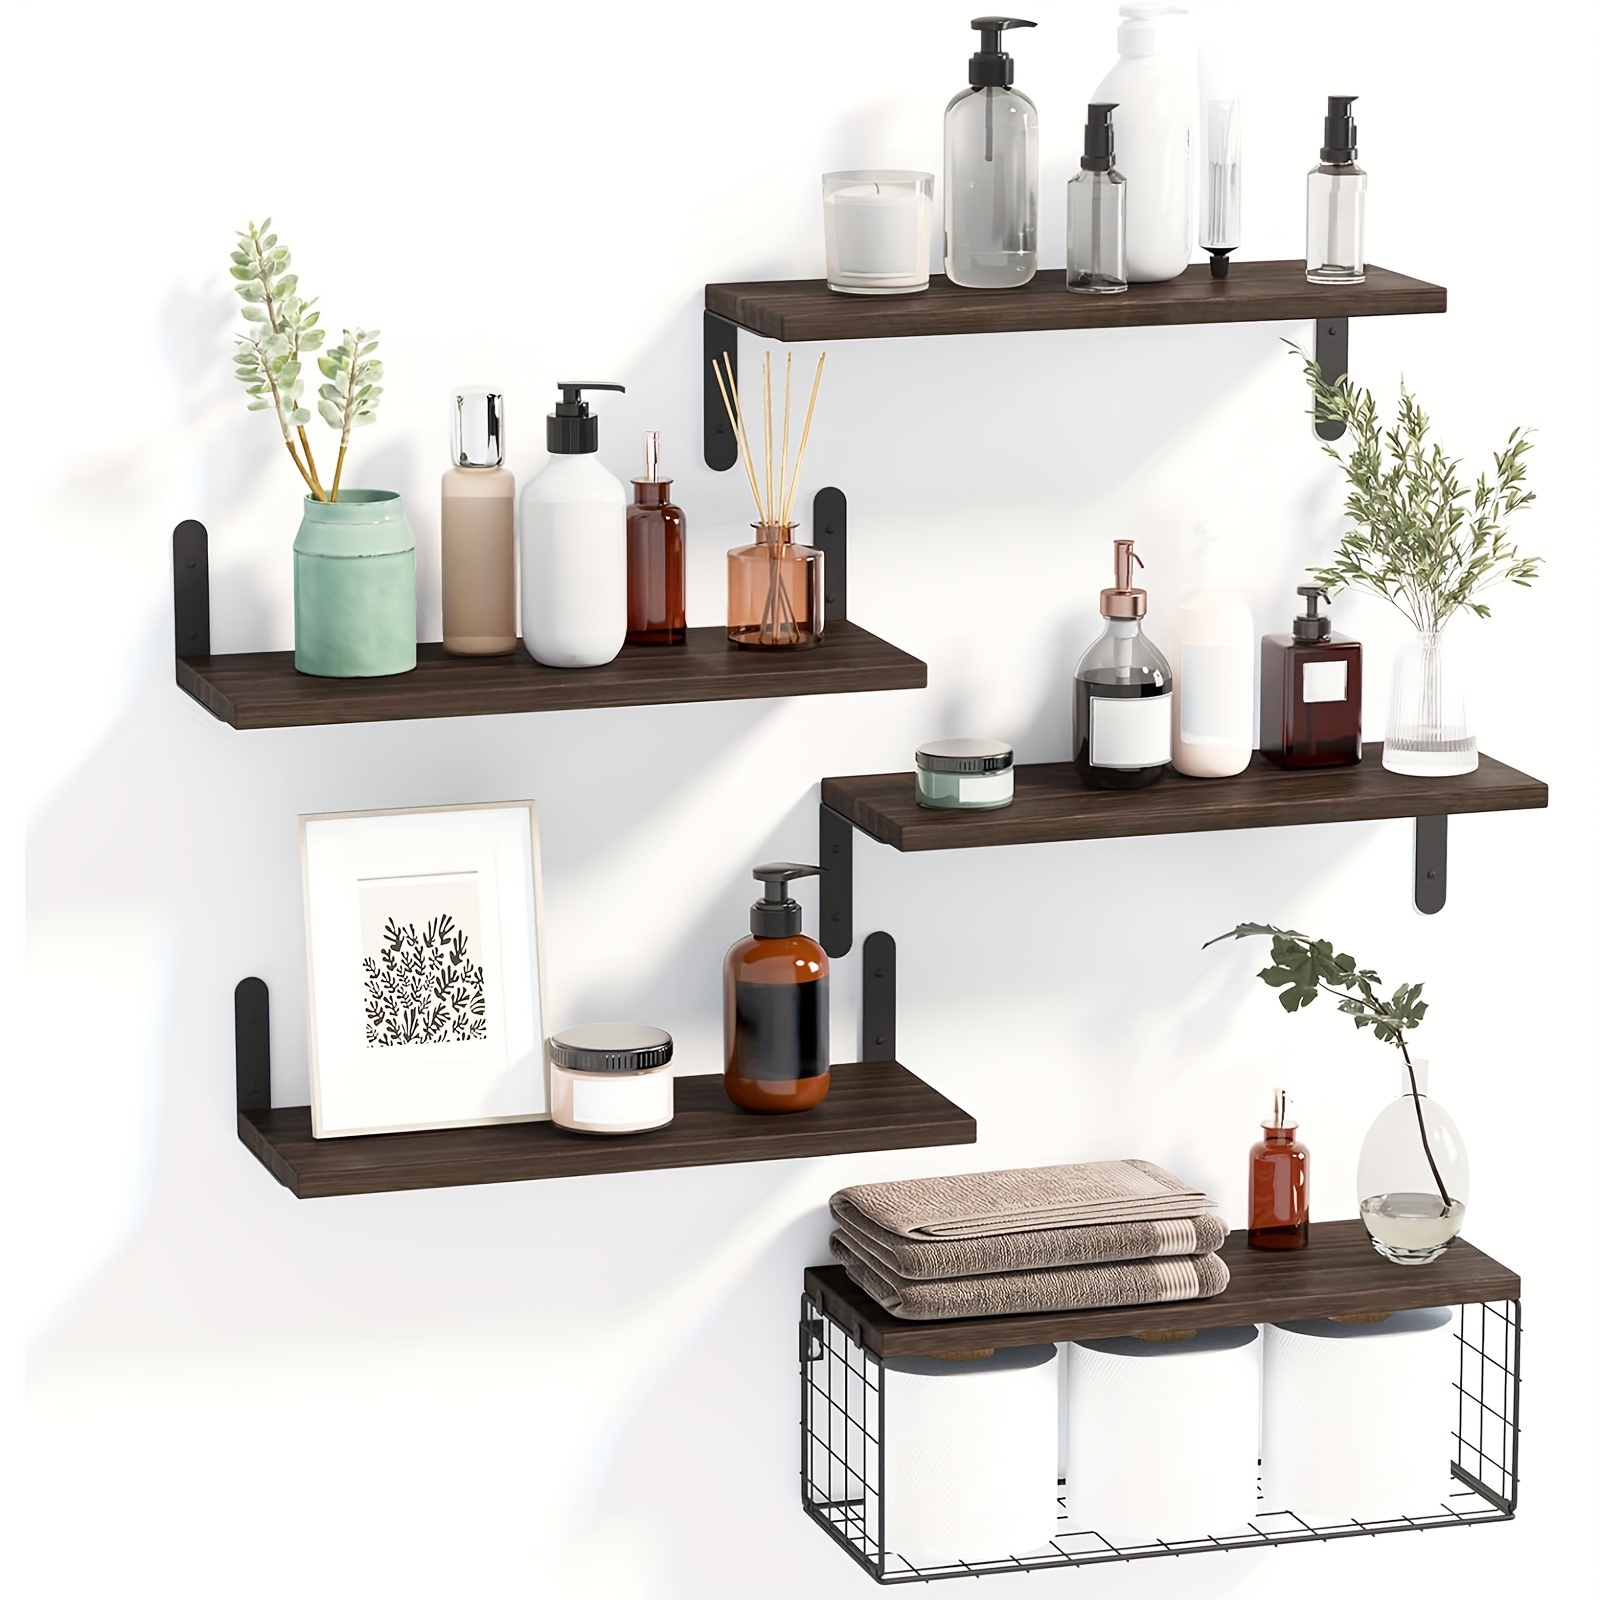 

5+1 Tier Bathroom Floating Shelves, Wall Mounted Wood Shelves Over Toilet With Wire Storage Basket, Make Storage Space And Keep Your Bathroom Neat And Organized (dark Carbonized Black)